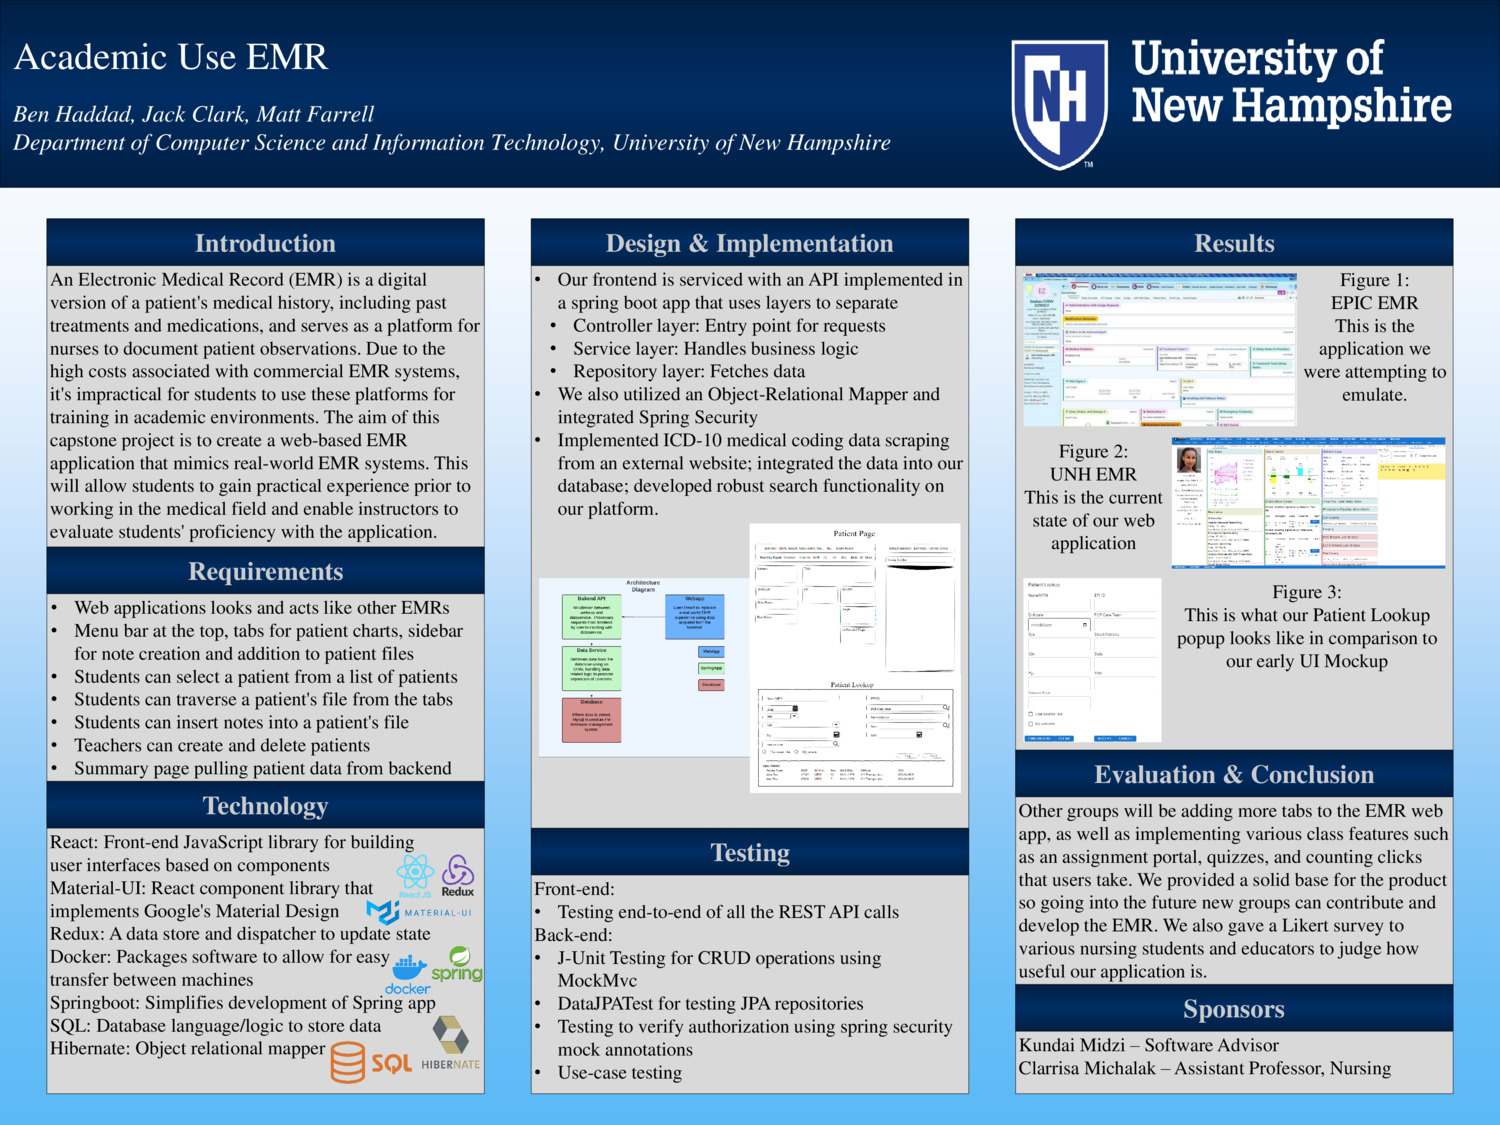 Academic Use Electronic Medical Record (Emr) by bvh1007